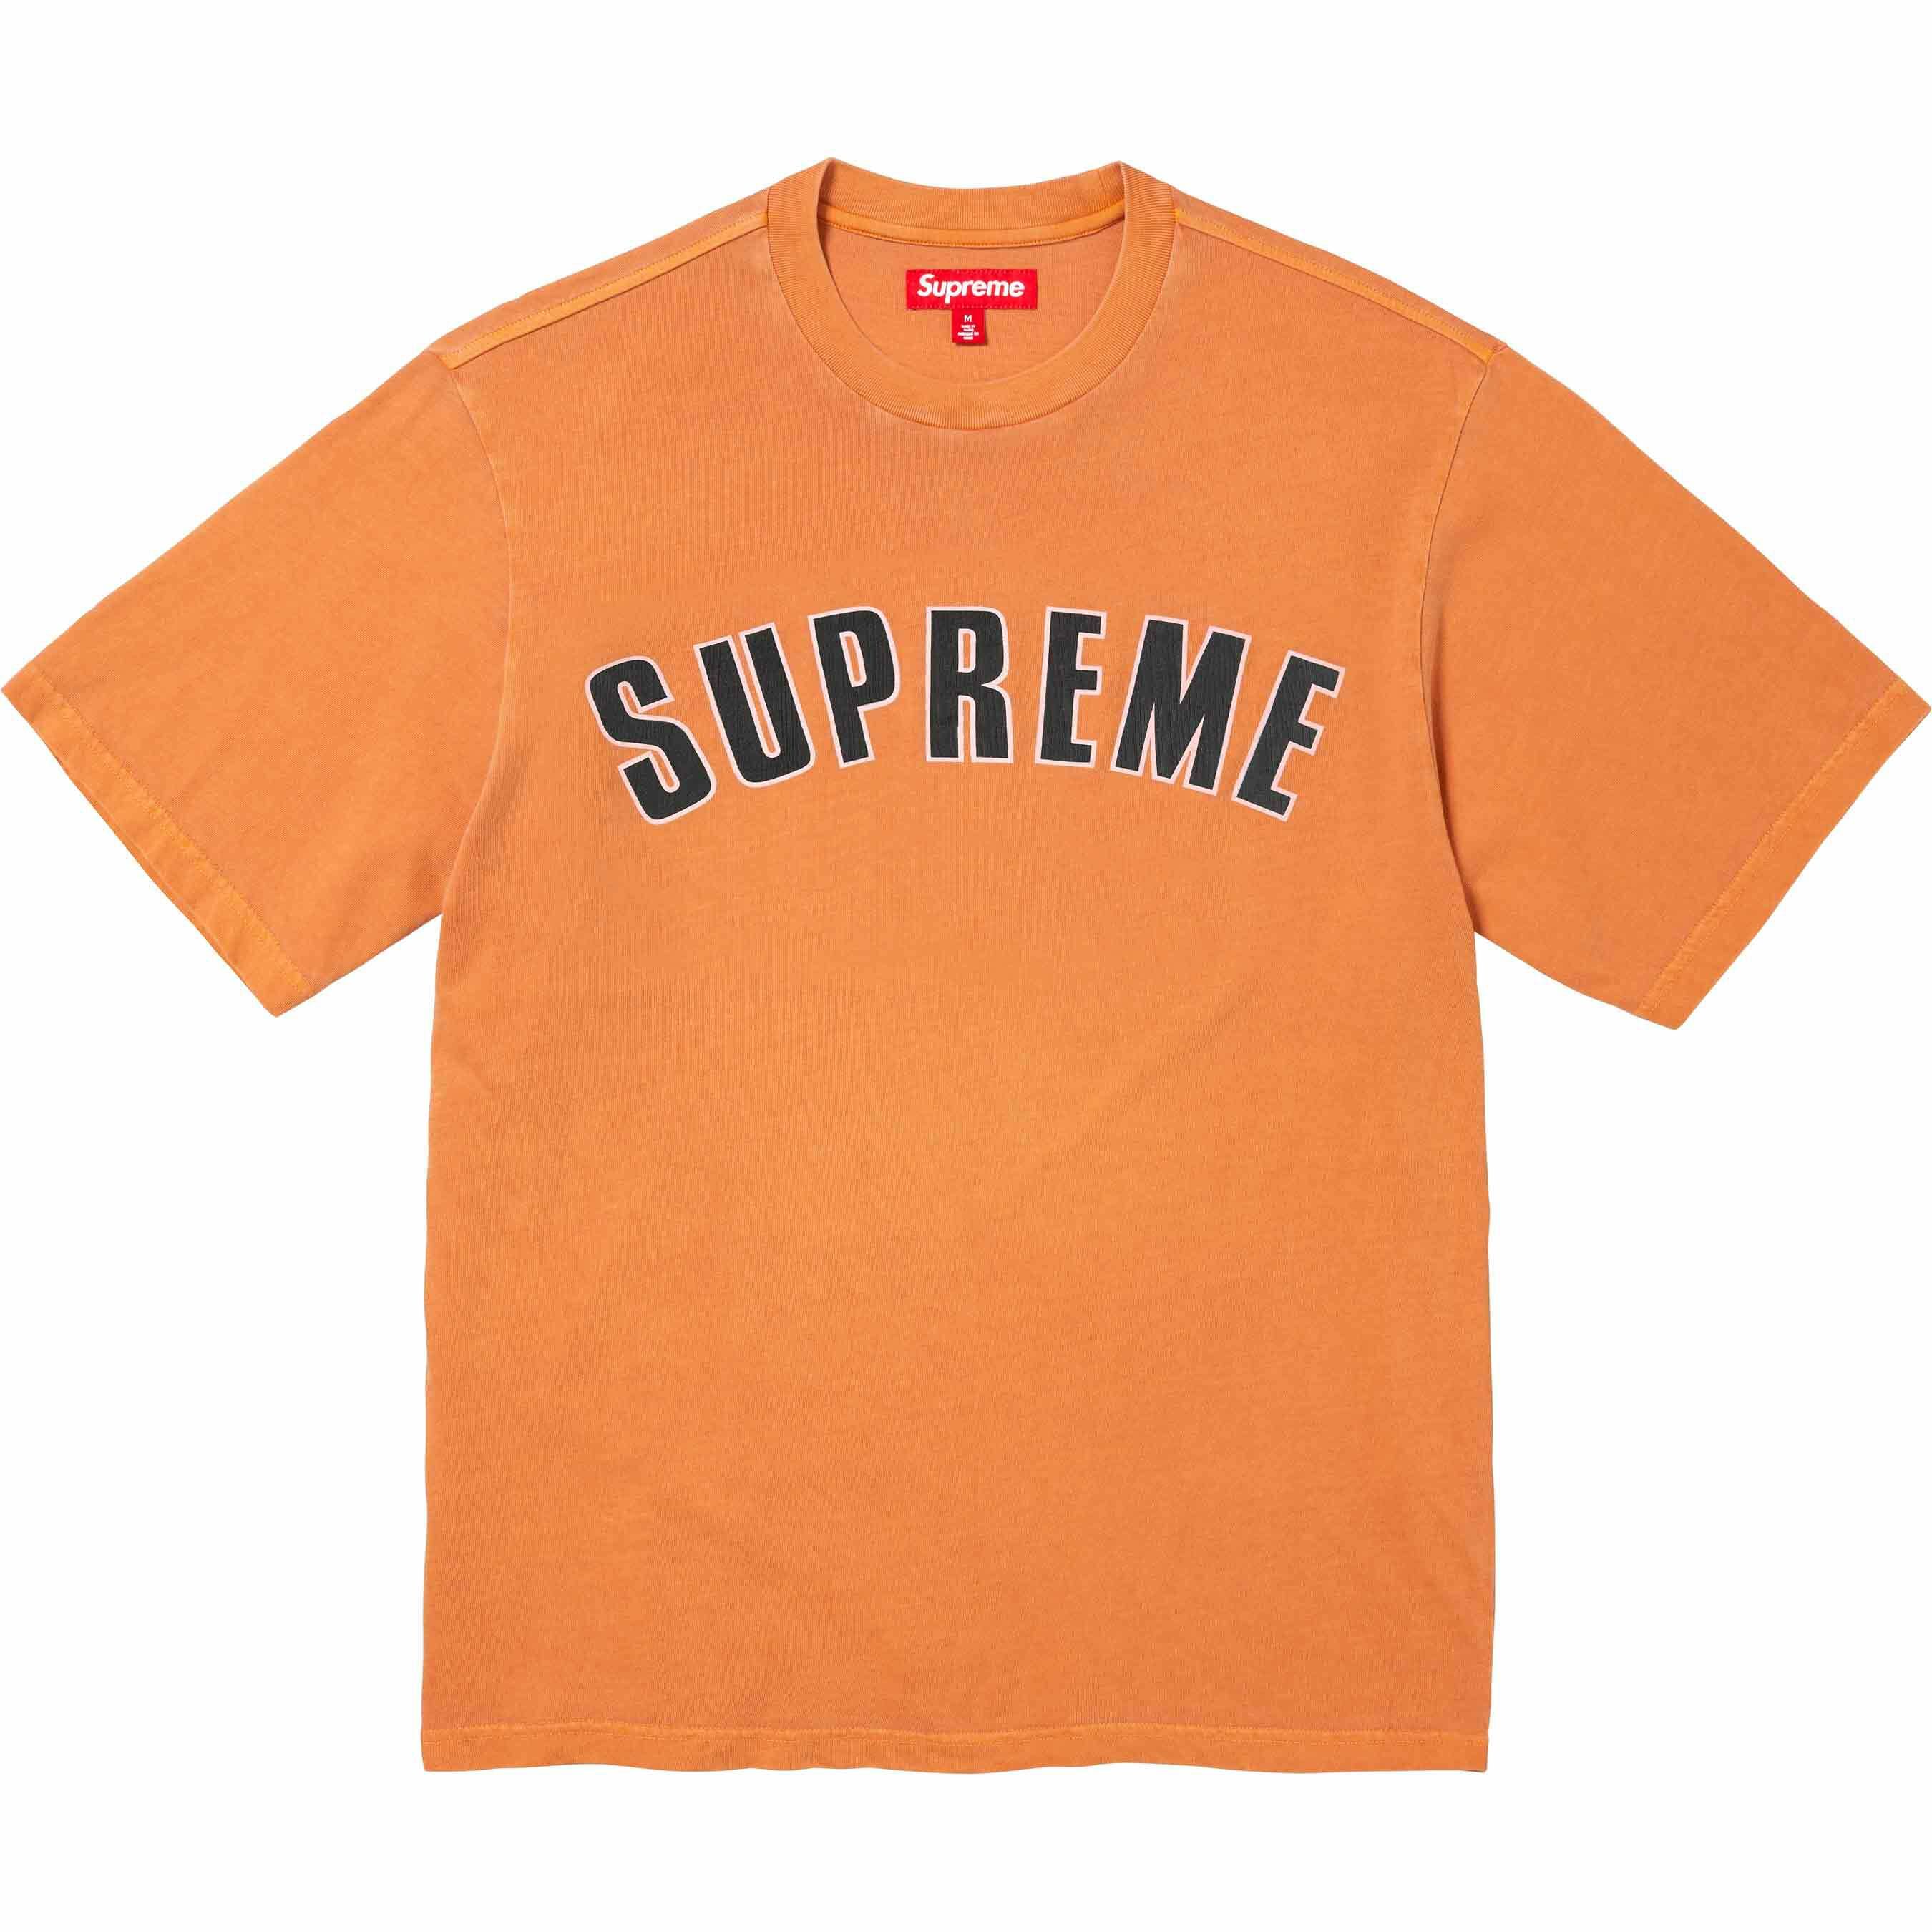 Supreme Cracked Arc S/S Top Tee (6Colors)